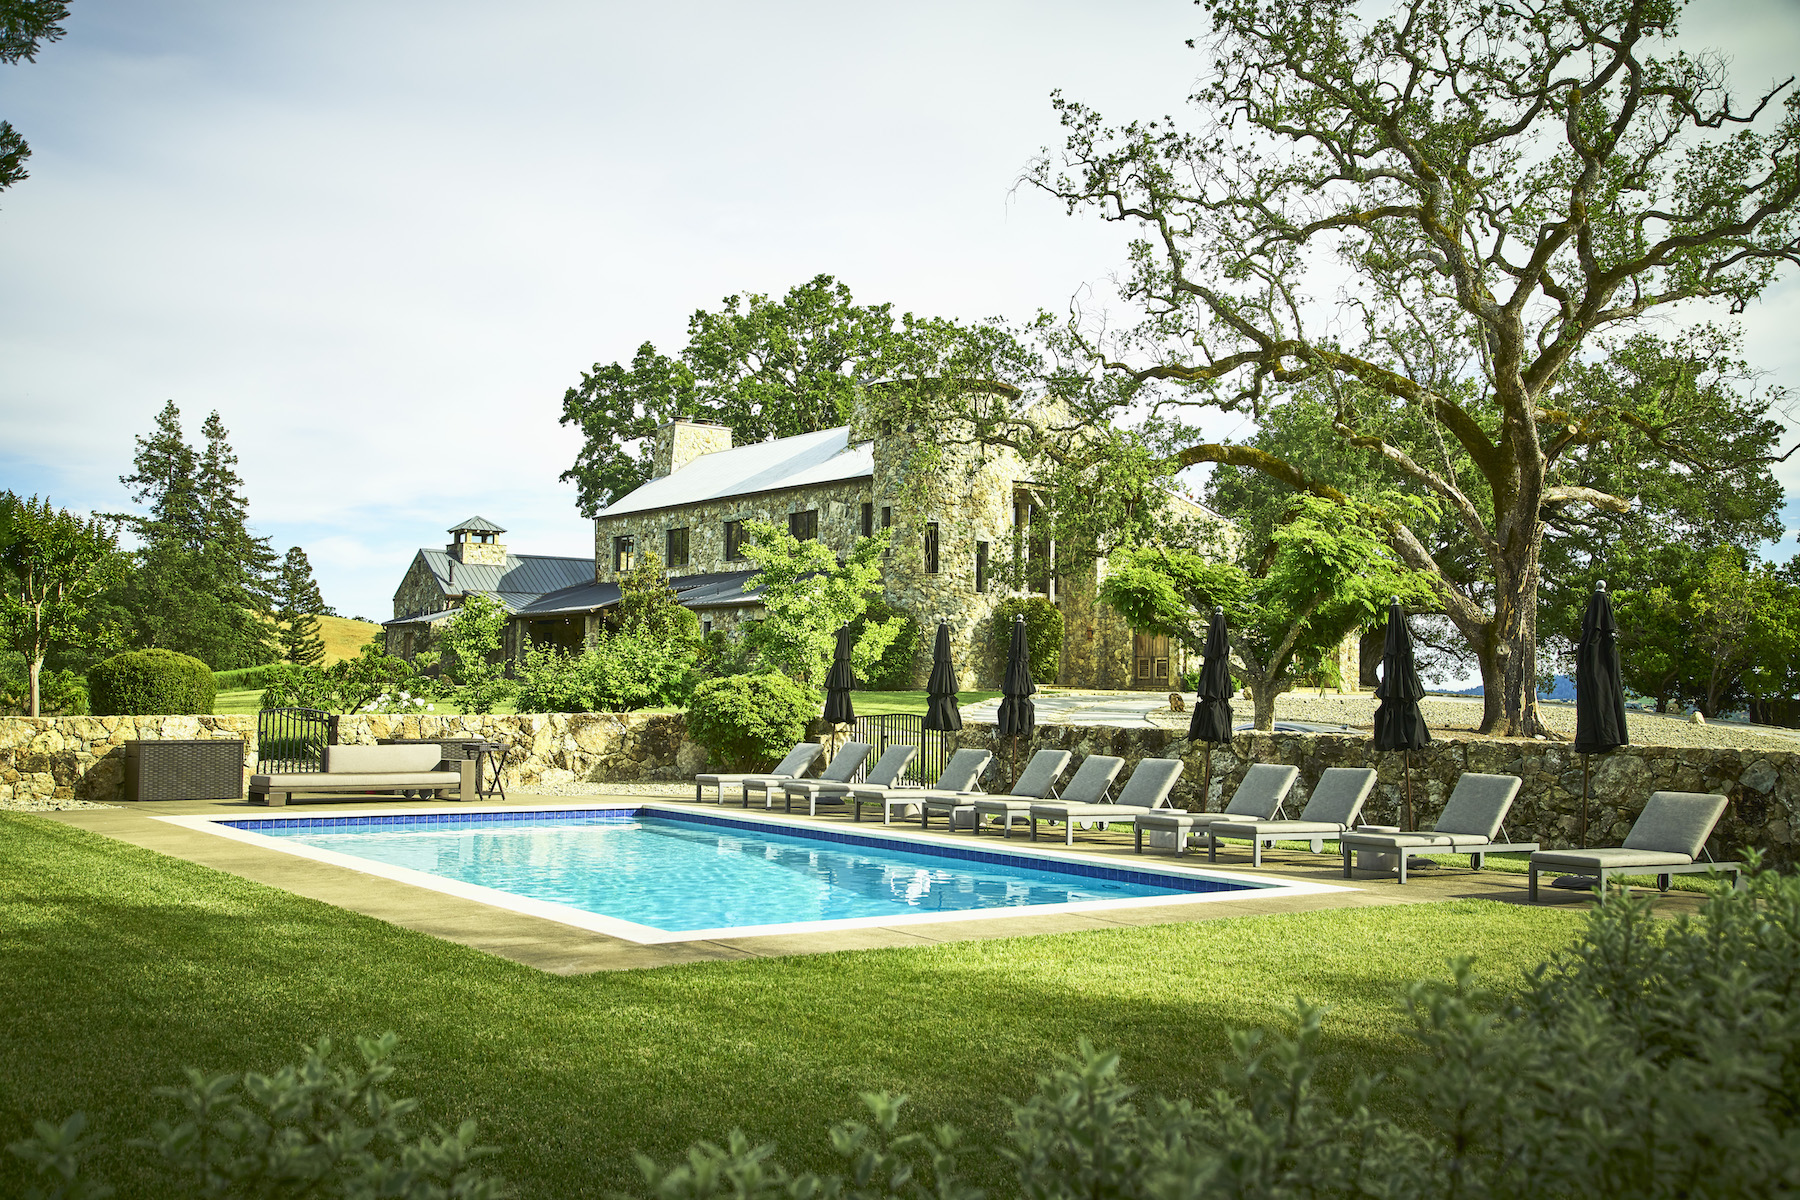 The residence stands behind a pristine swimming pool